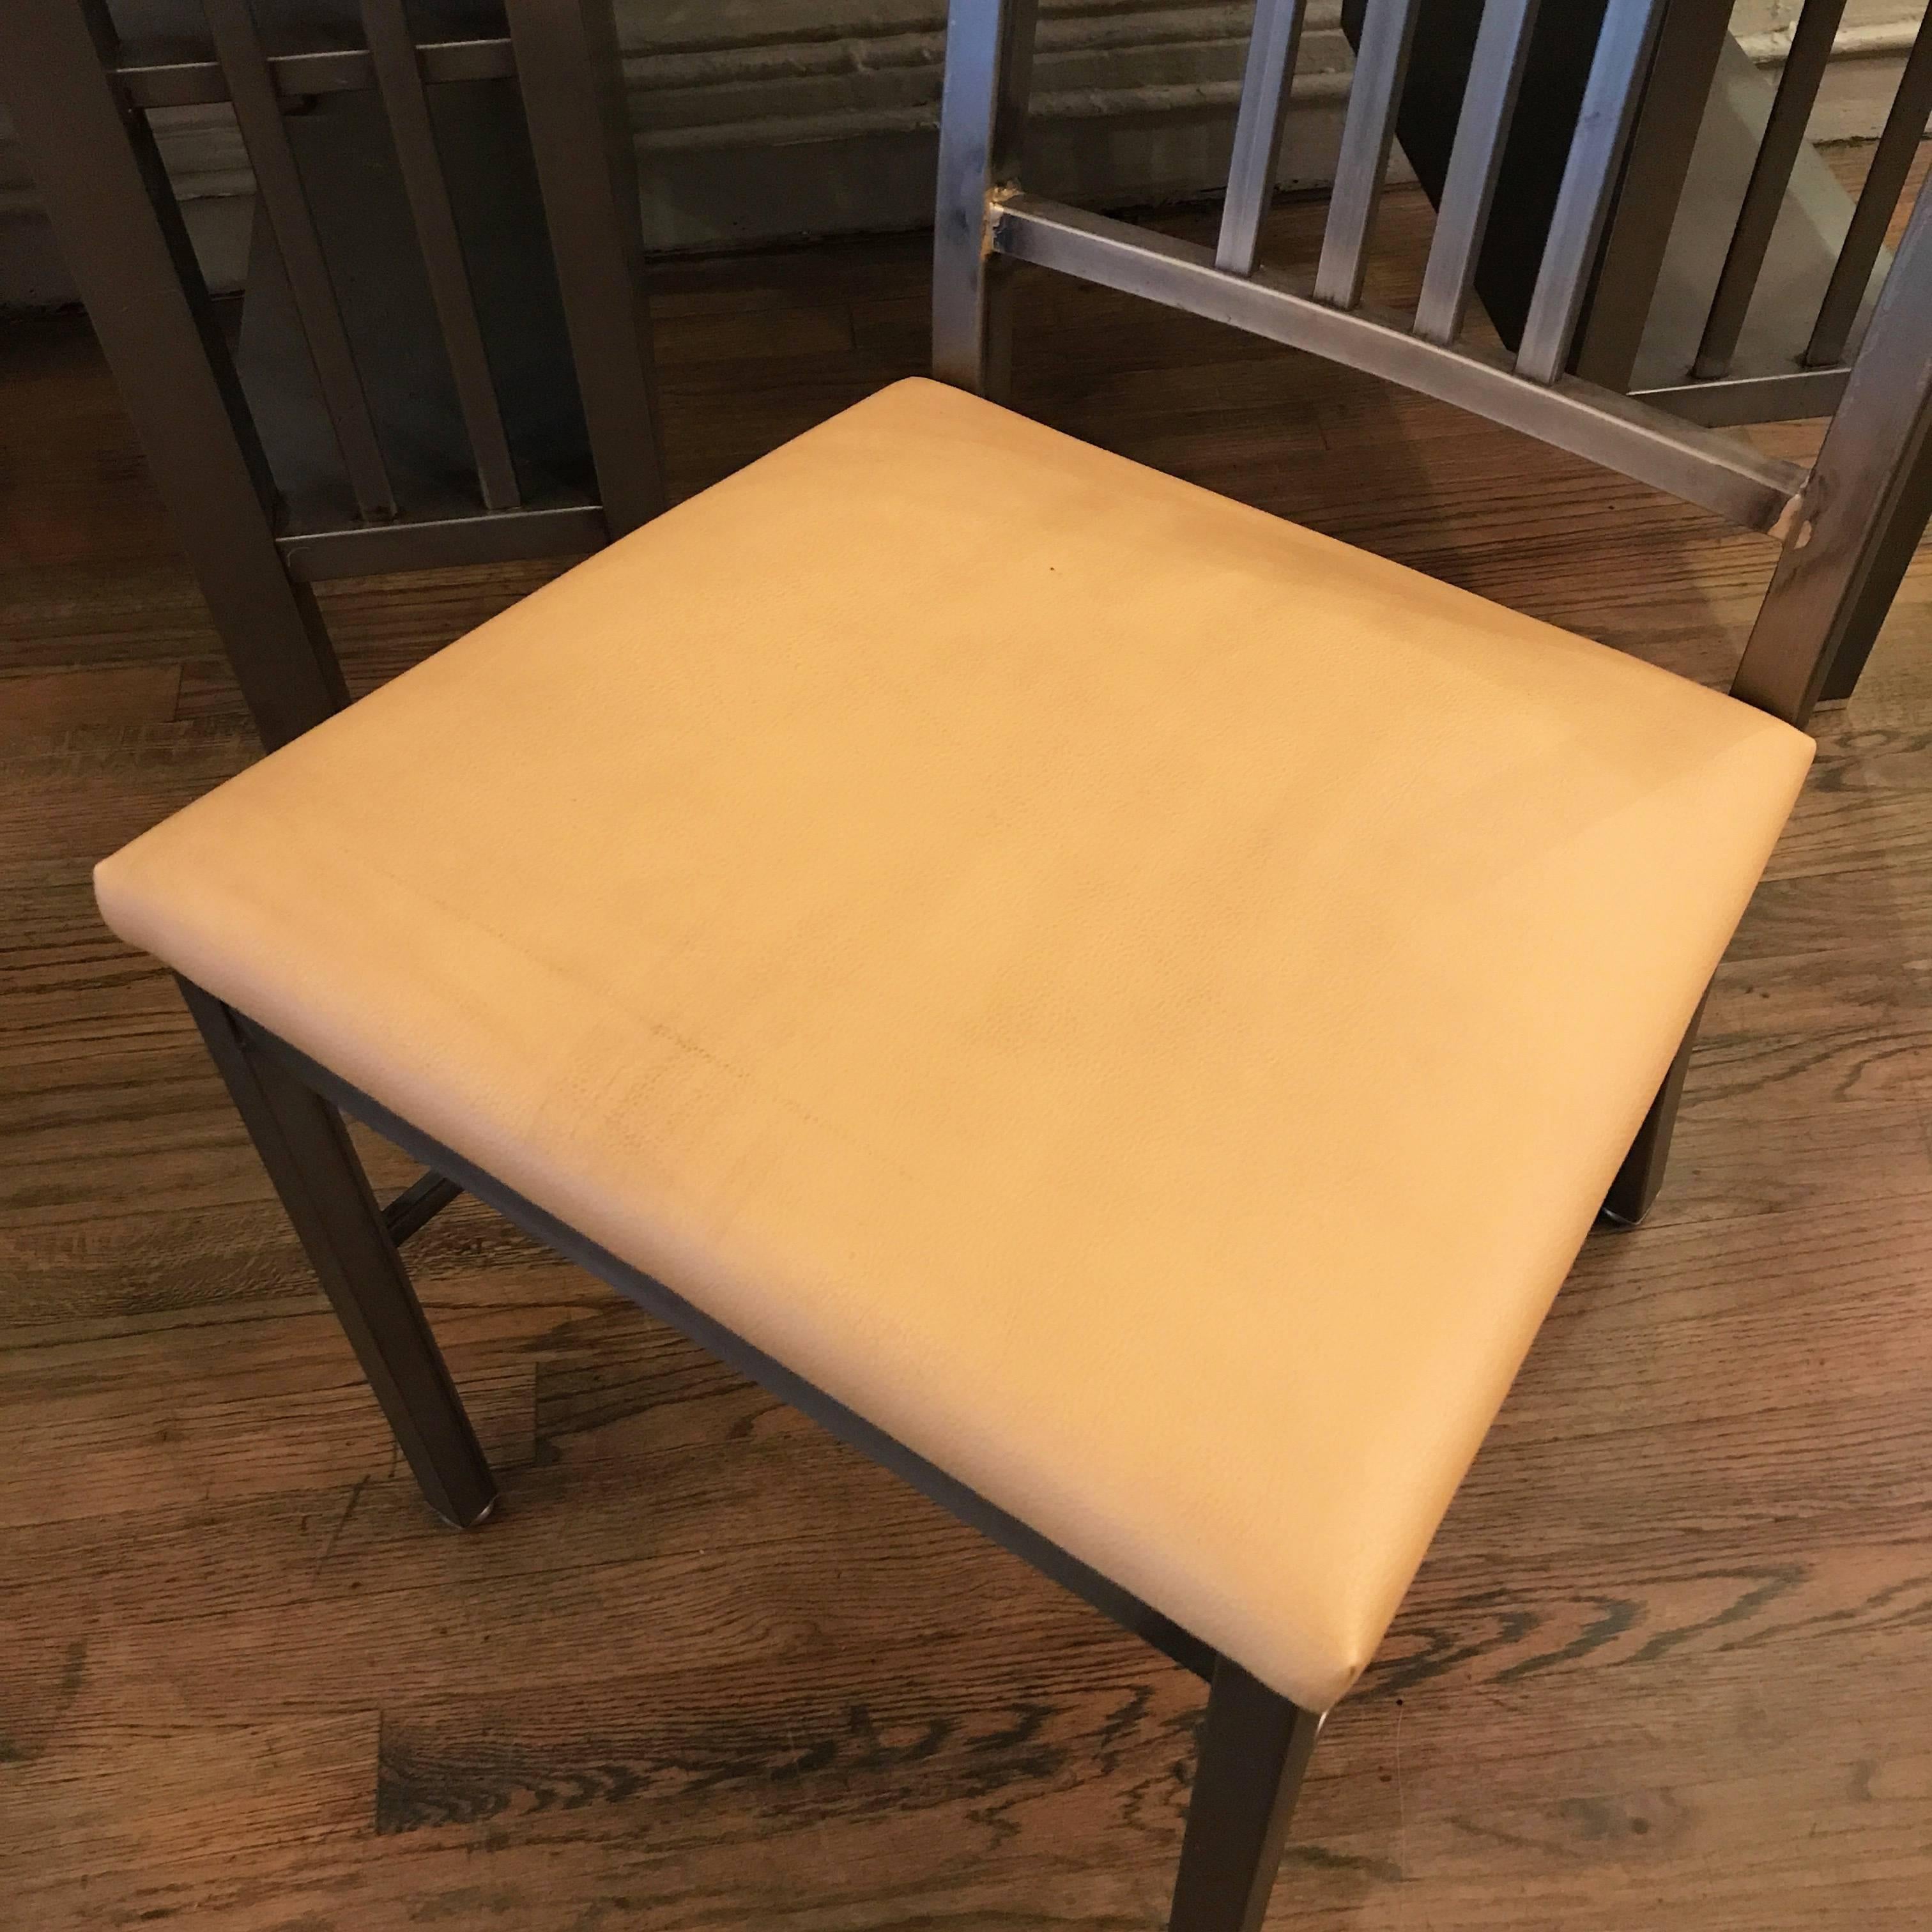 Industrial Machine Age Brushed Steel Desk Chair In Excellent Condition For Sale In Brooklyn, NY